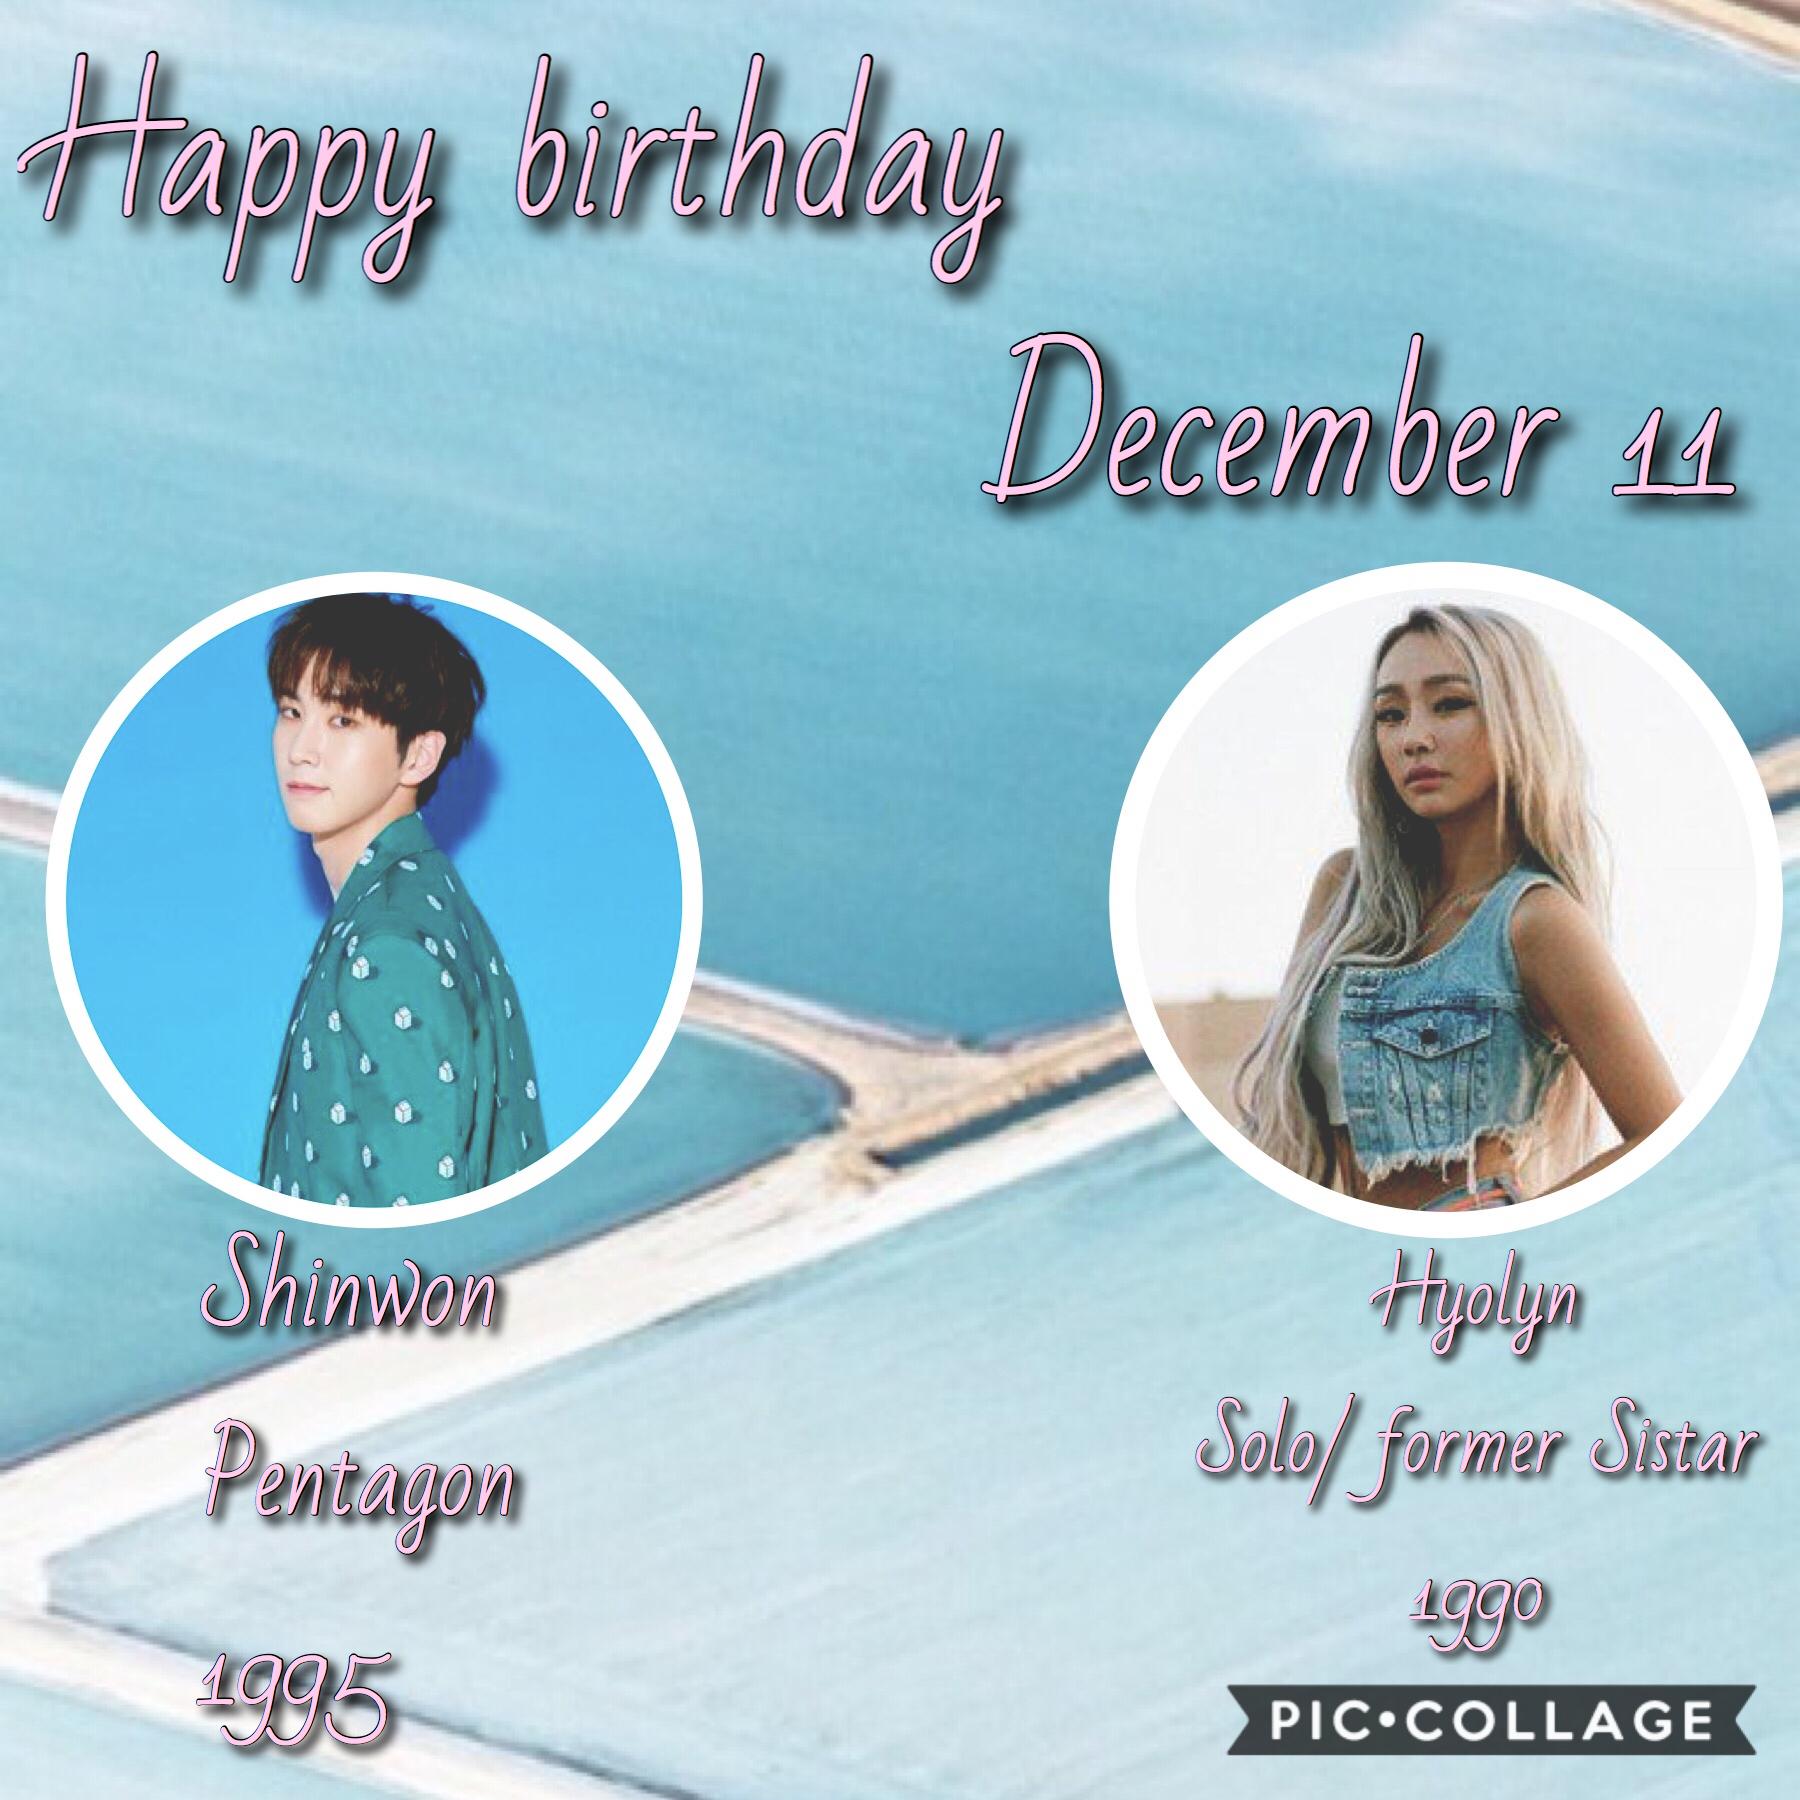 •🎈🍂•
Happy birthday!!💞💞 Shinwon is so underrated in his group and Hyolyn has such a beautiful voice!
🍁🍂~Whoop~🍂🍁